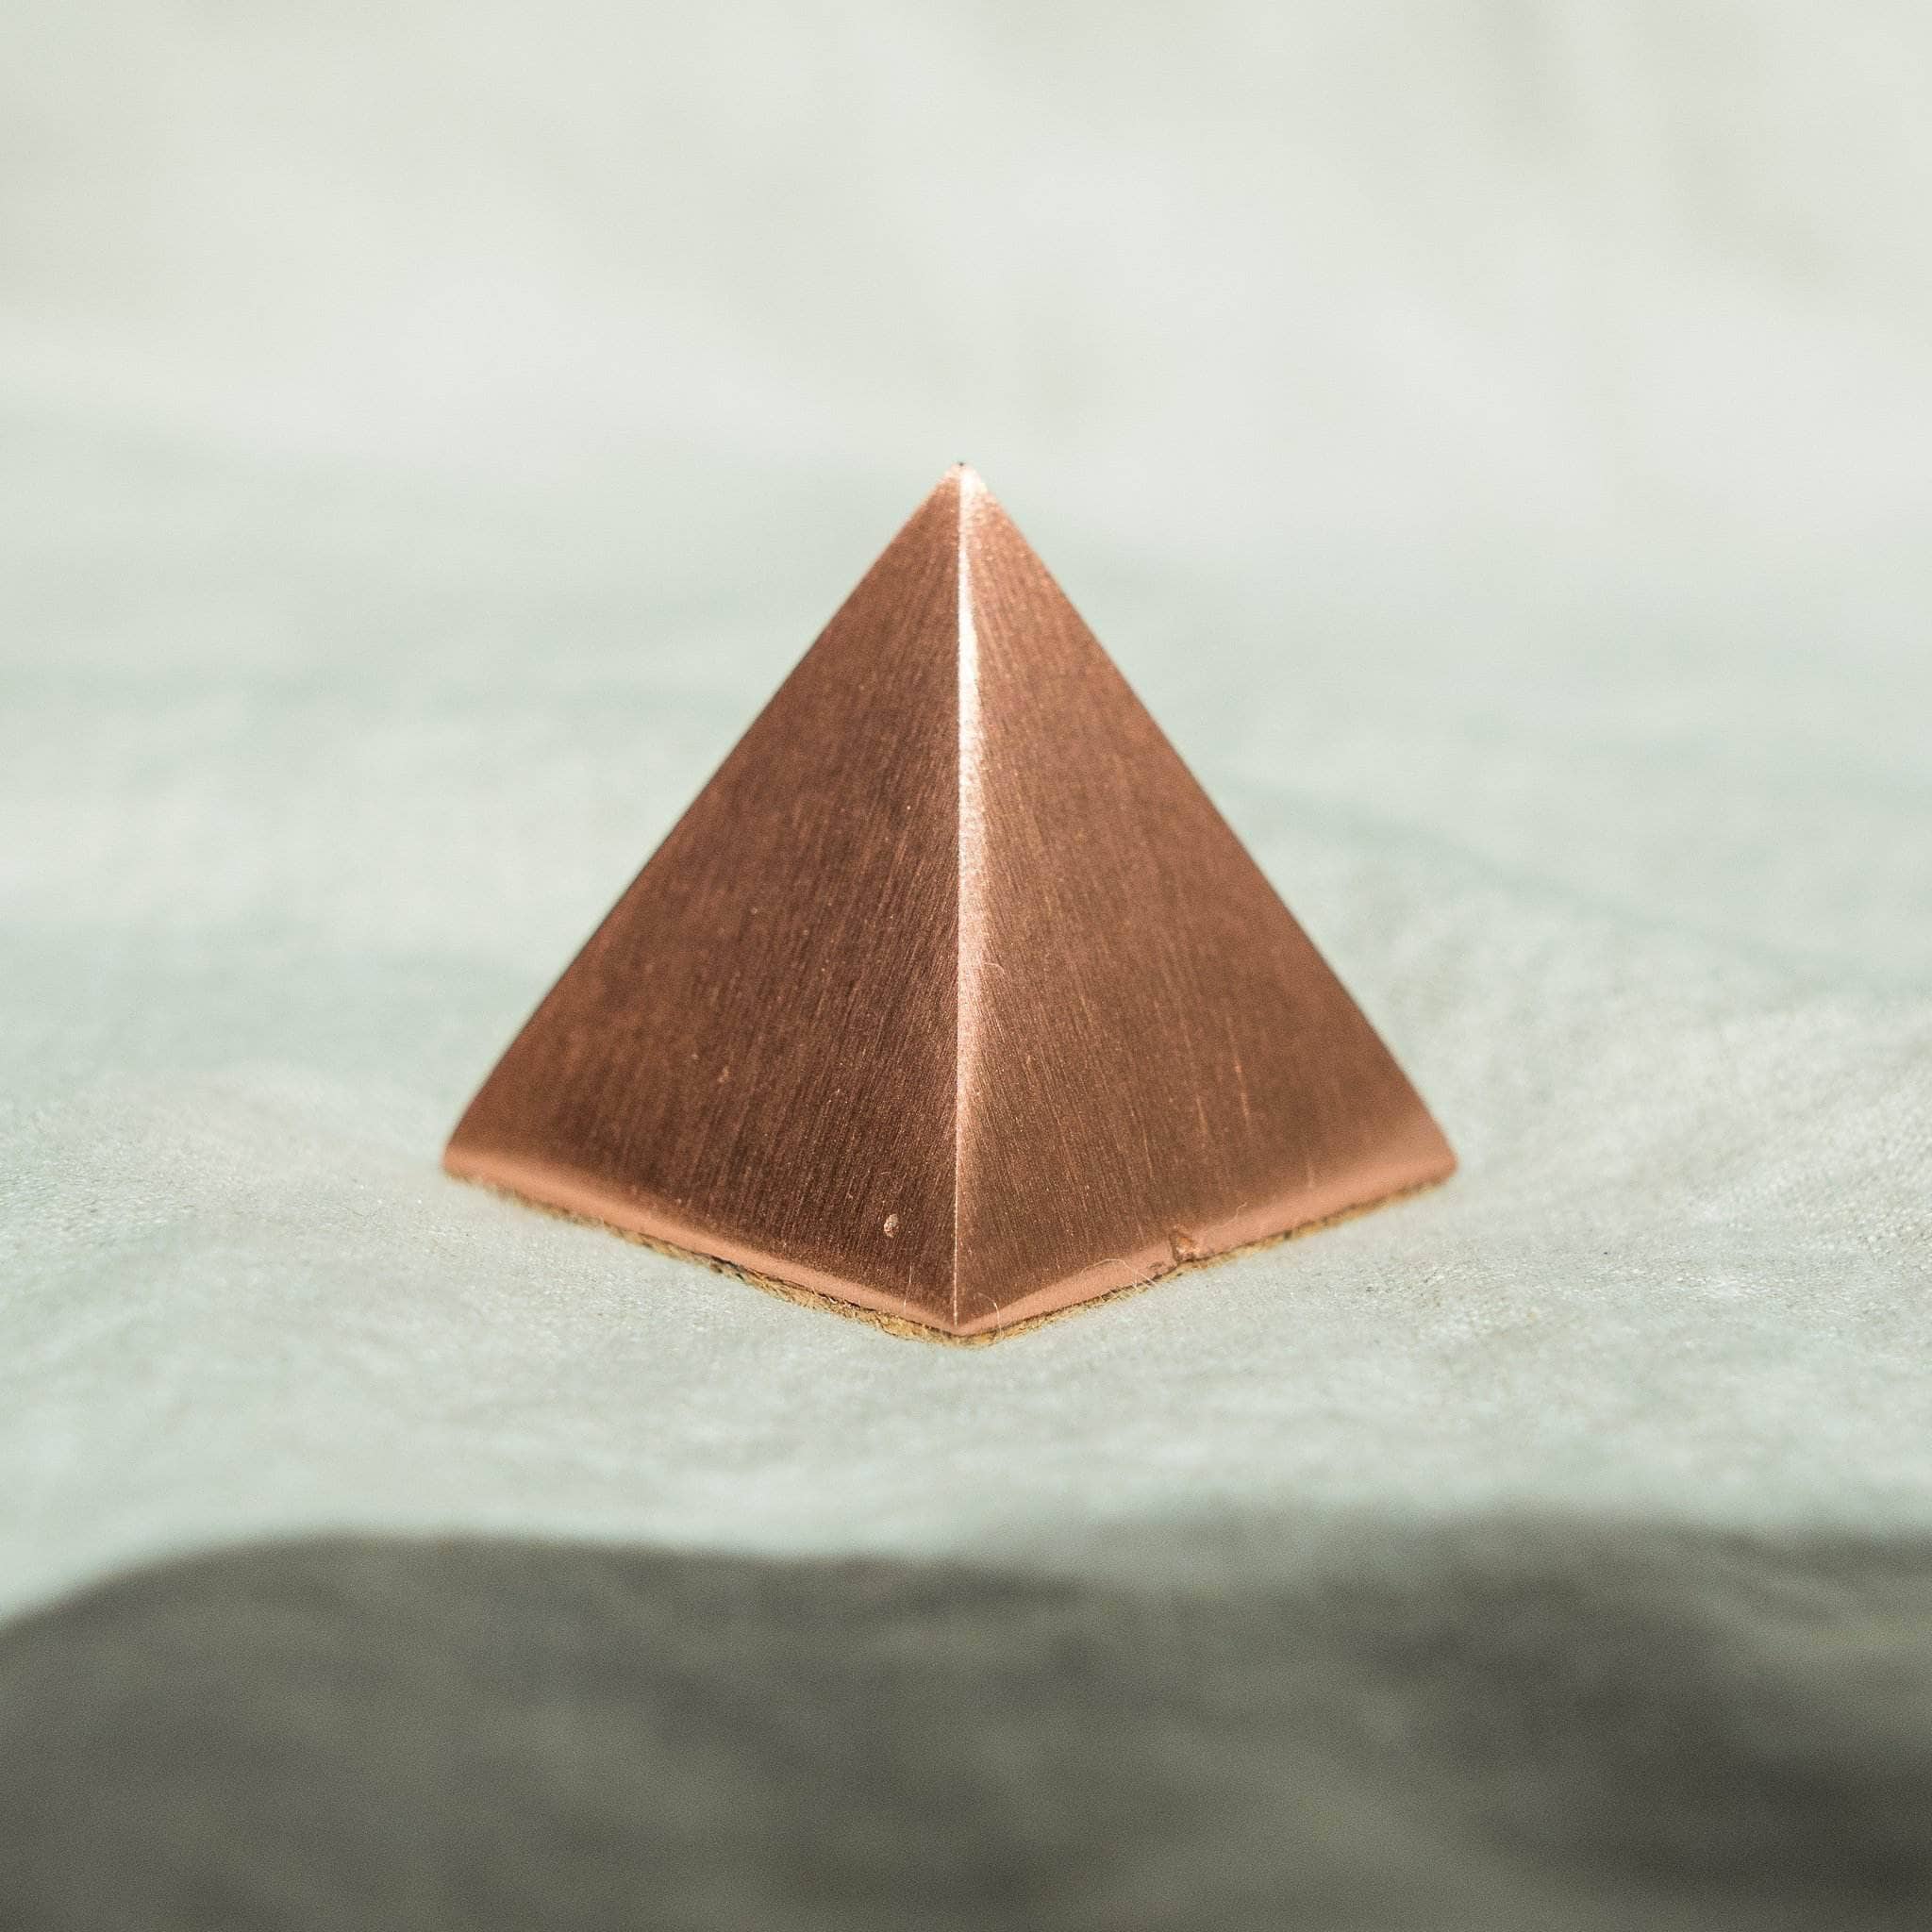 special design copper pyramid with best